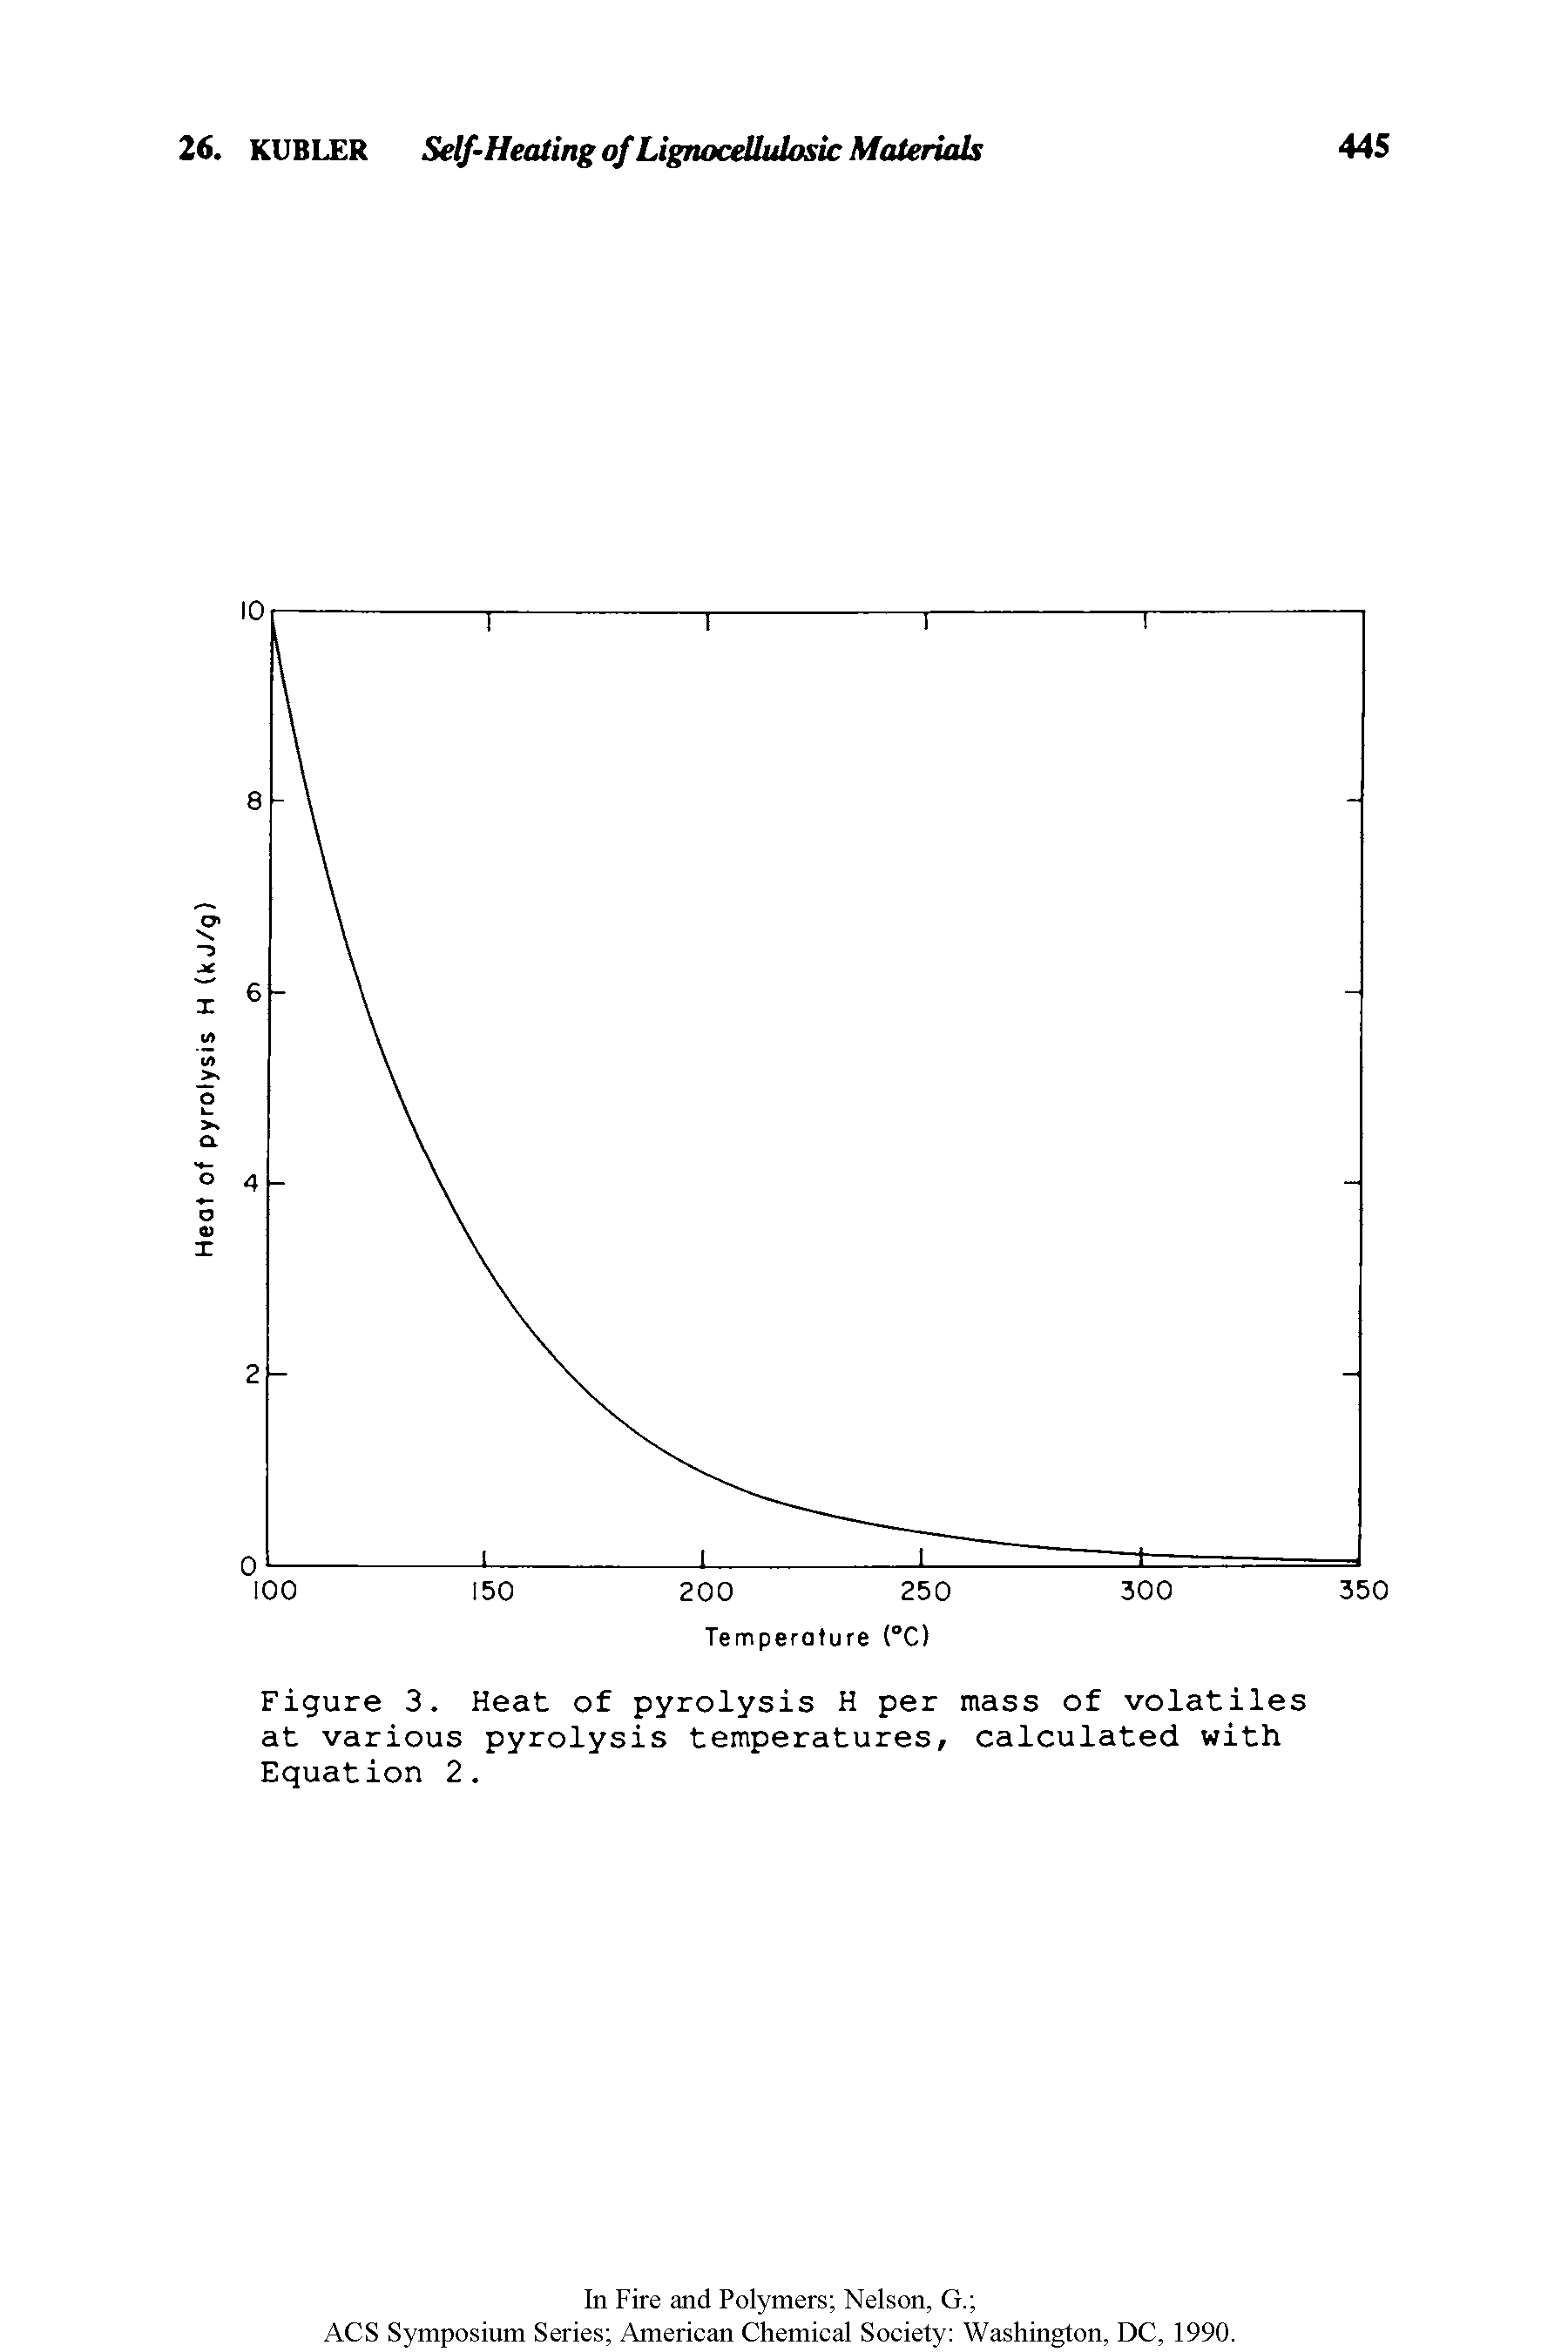 Figure 3. Heat of pyrolysis H per mass of volatiles at various pyrolysis temperatures, calculated with Equation 2.